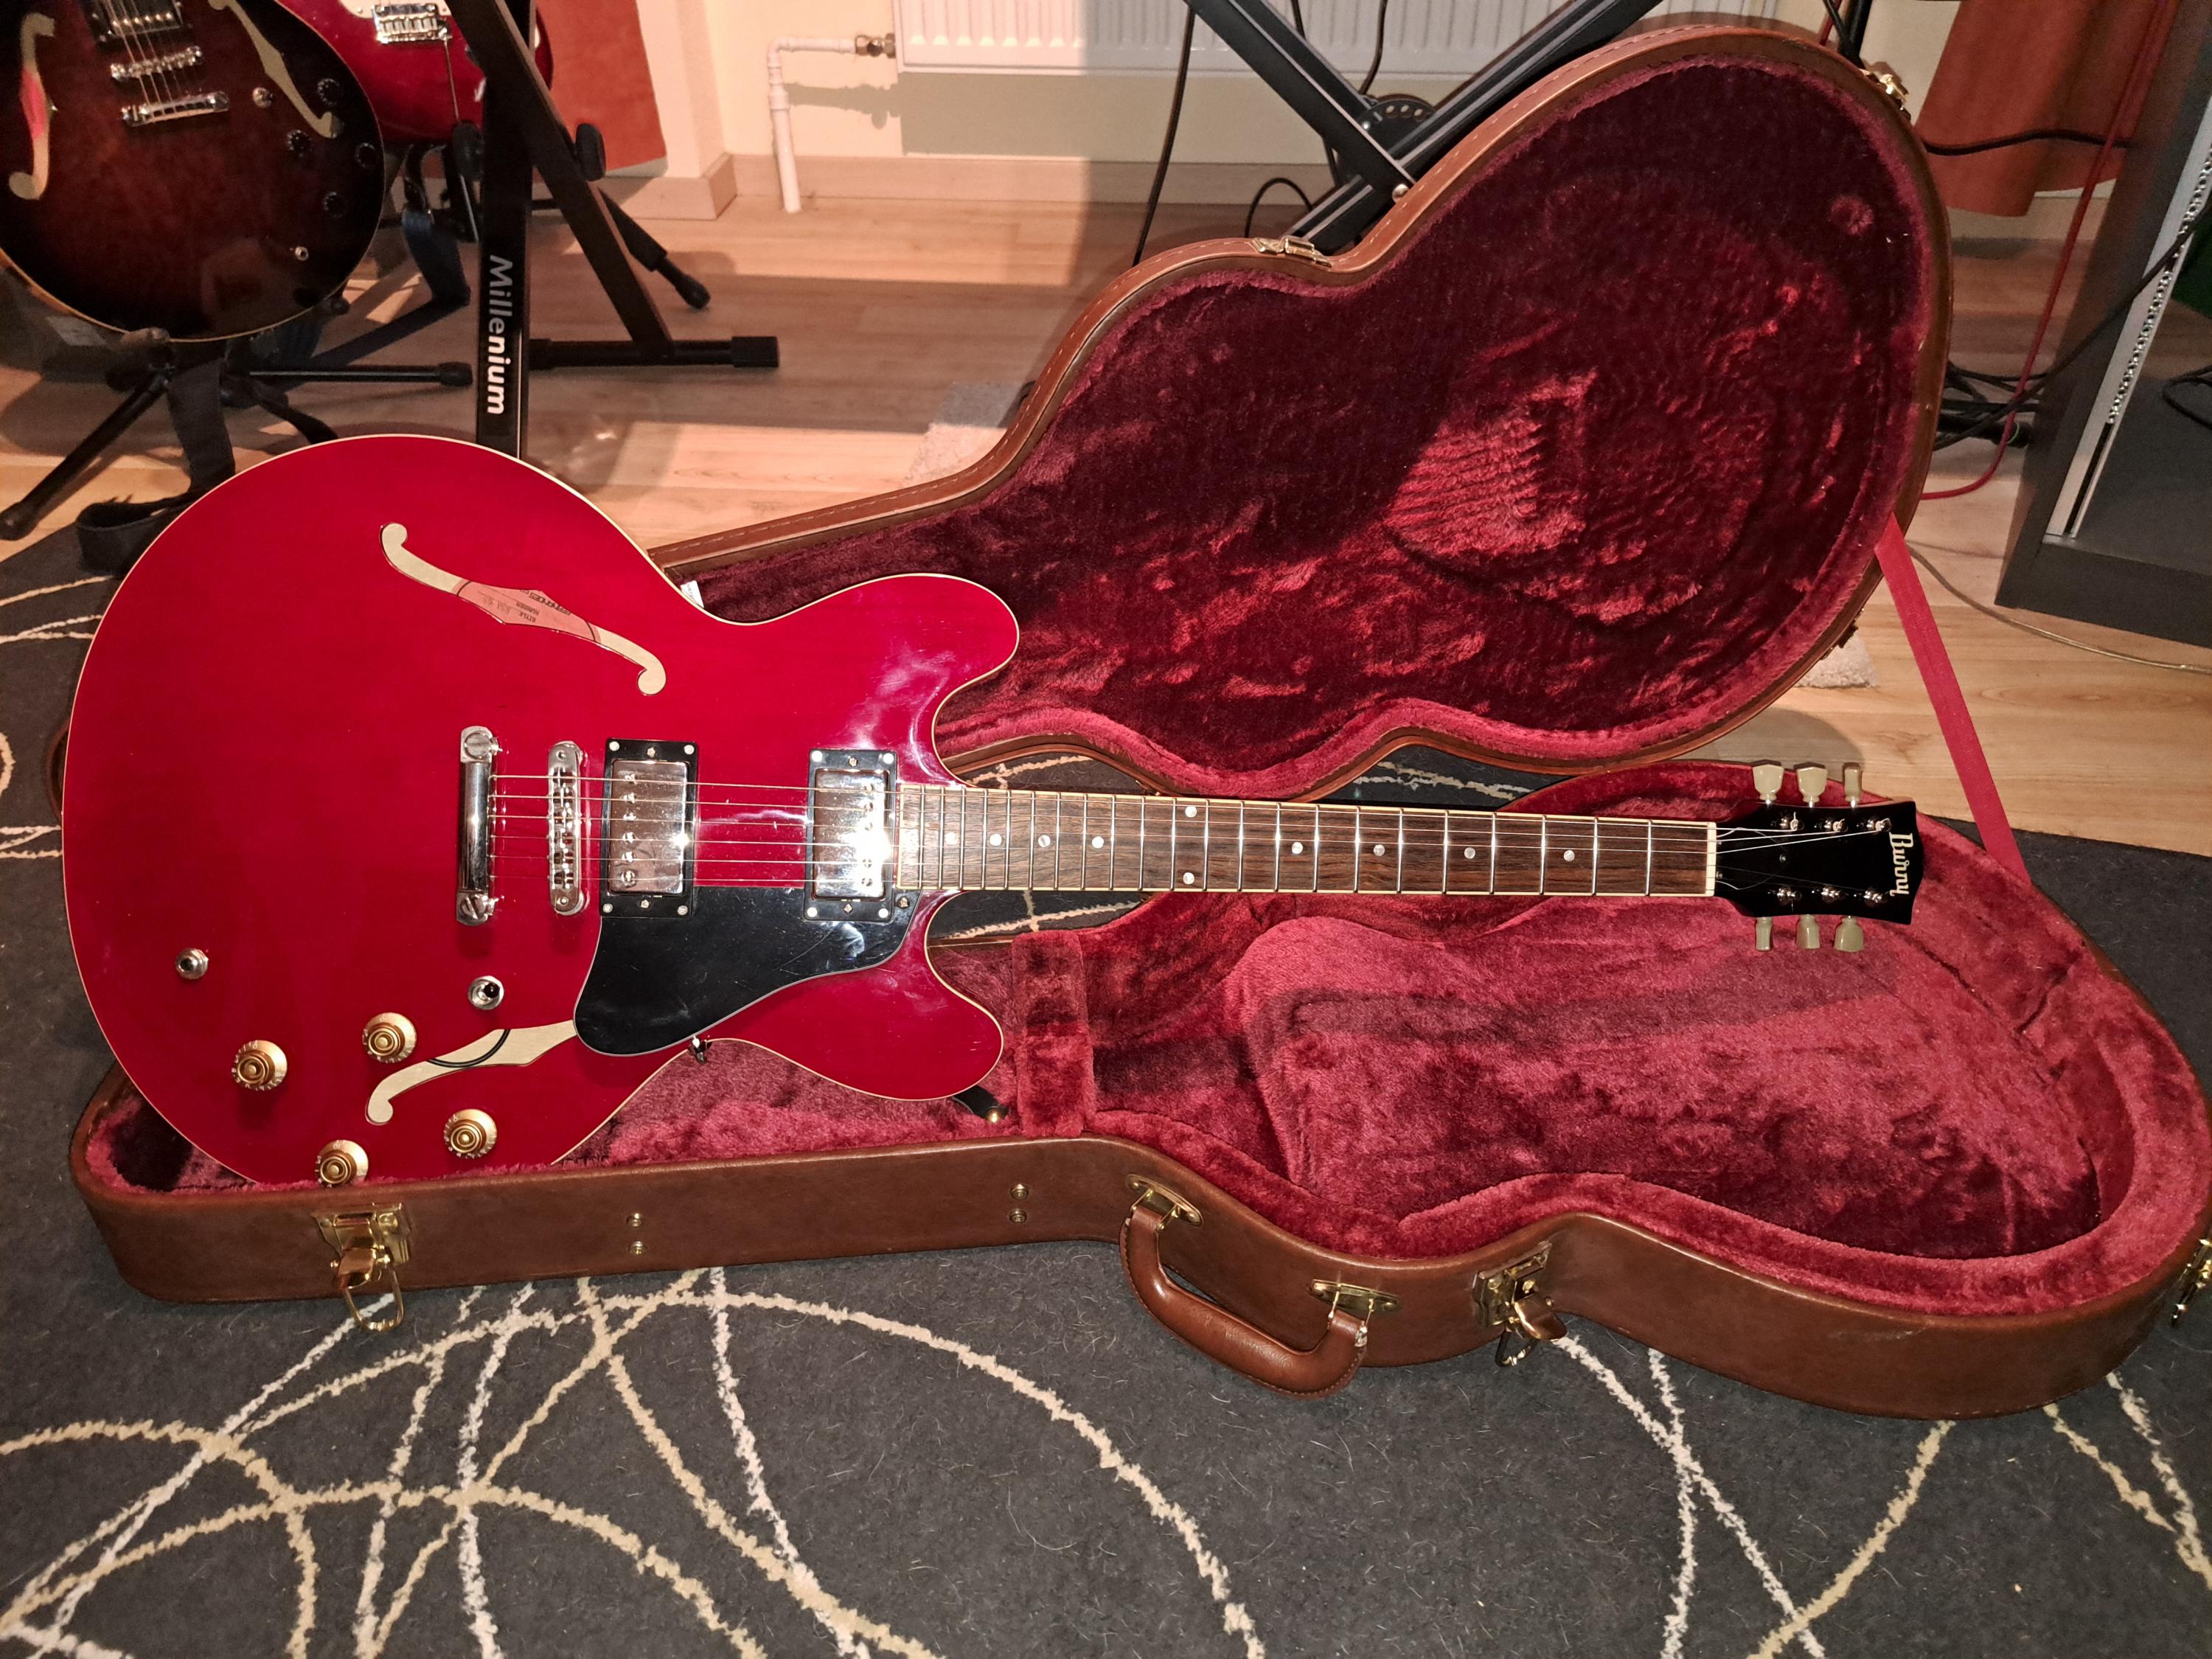 ES-335 style guitar love thread, no telecasters allowed-20230328_192526-jpg